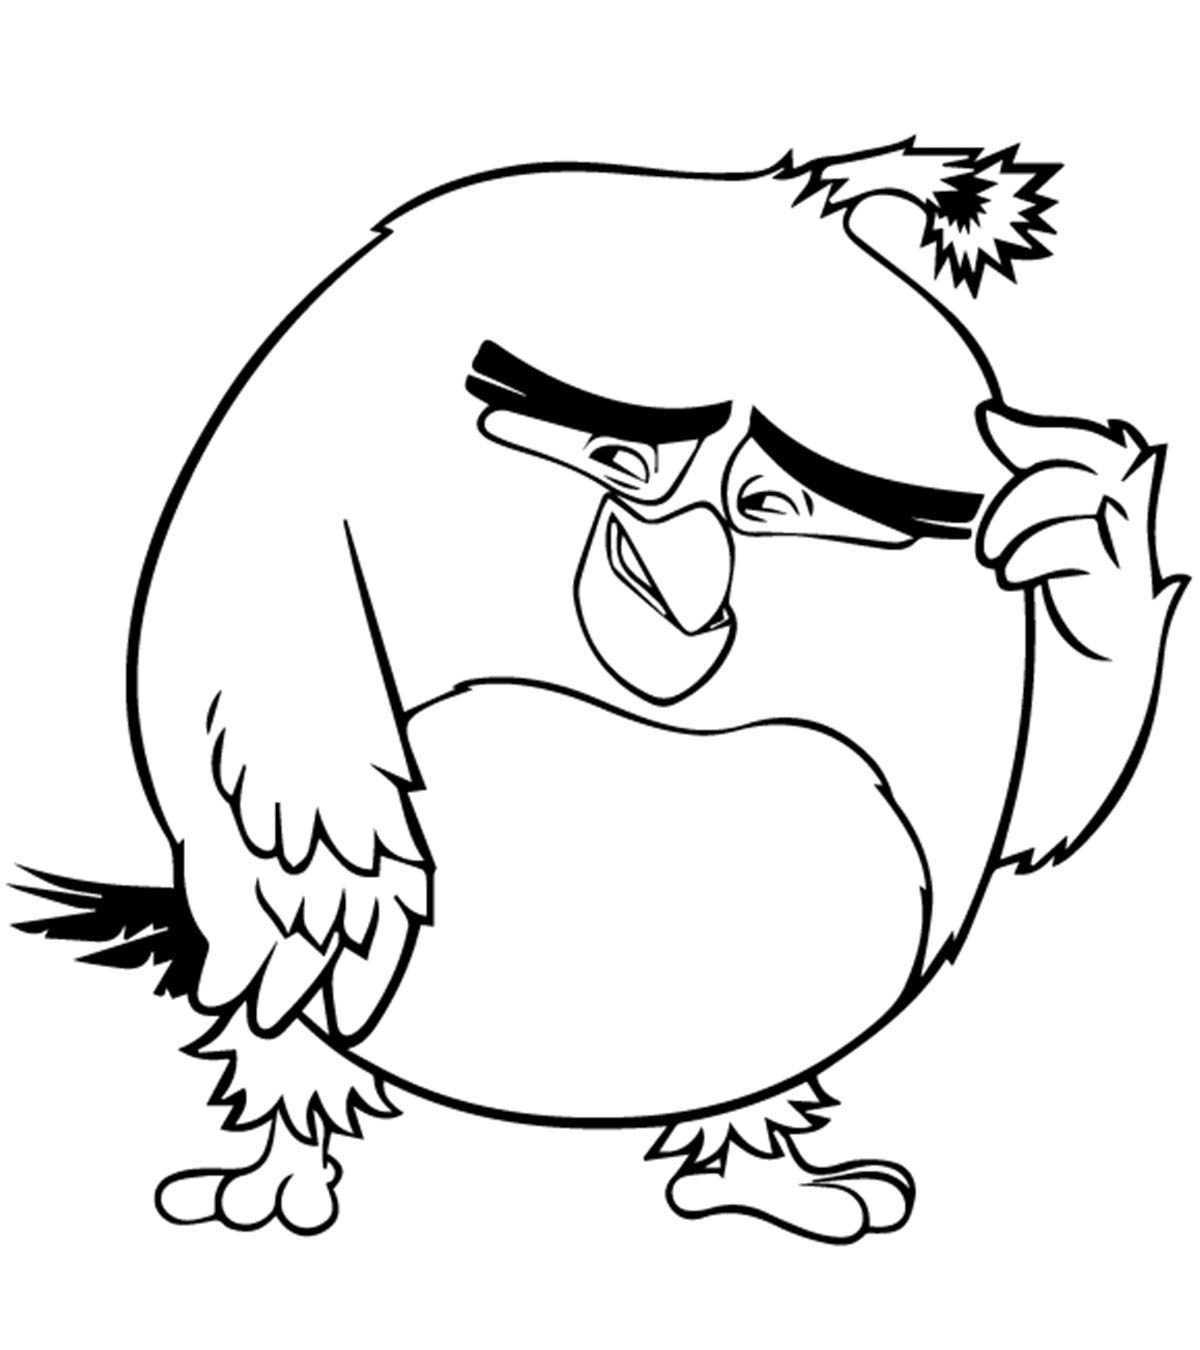 40 Cute Angry Birds Coloring Pages Your Toddler Will Love_image